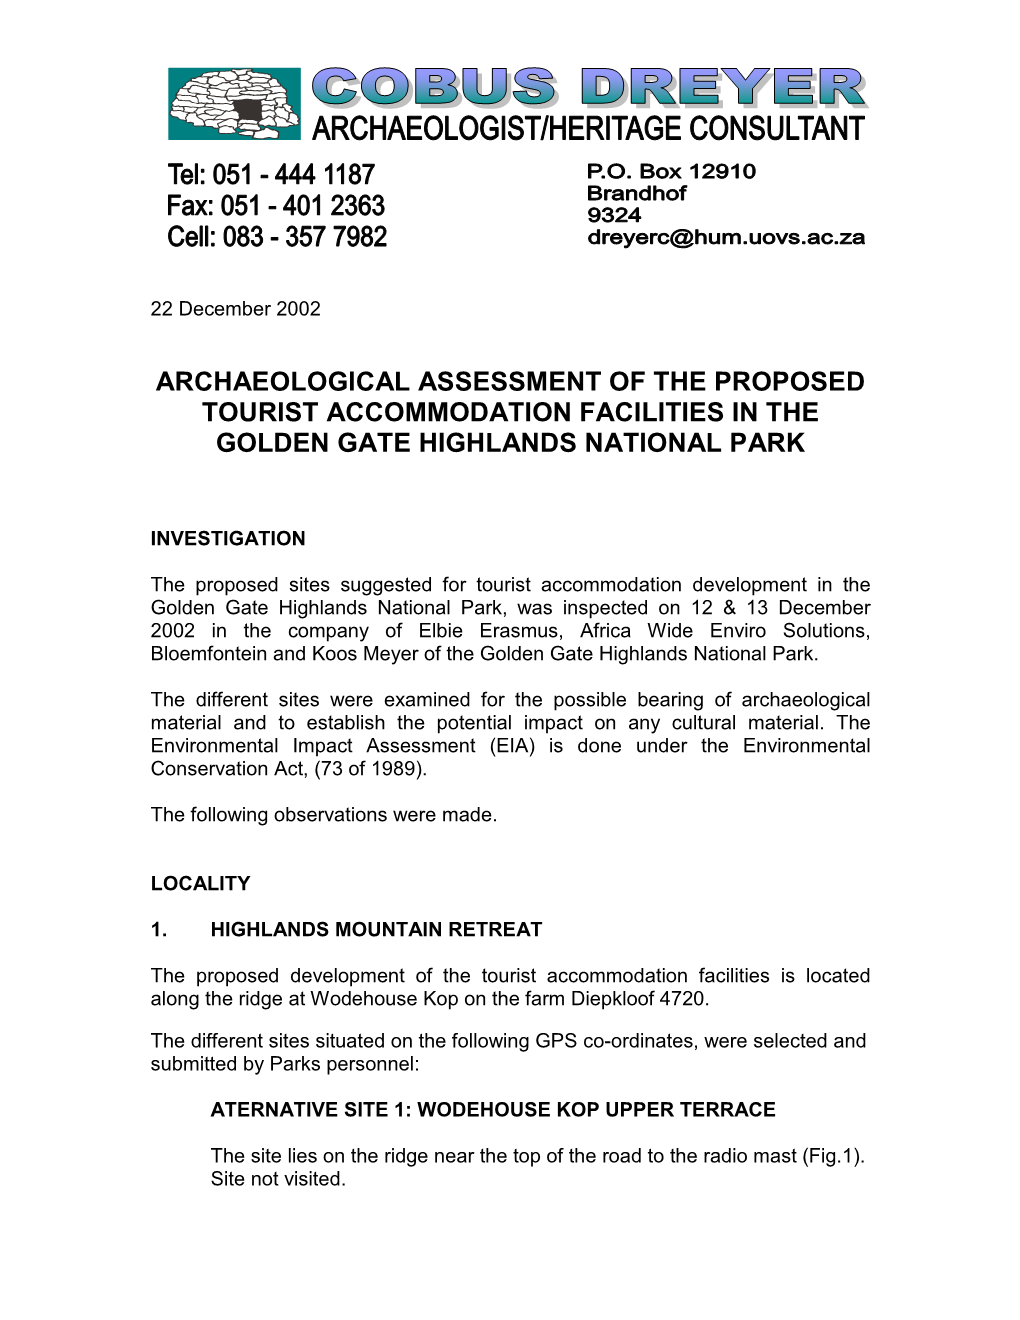 Archaeological Assessment of the Proposed Tourist Accommodation Facilities in the Golden Gate Highlands National Park